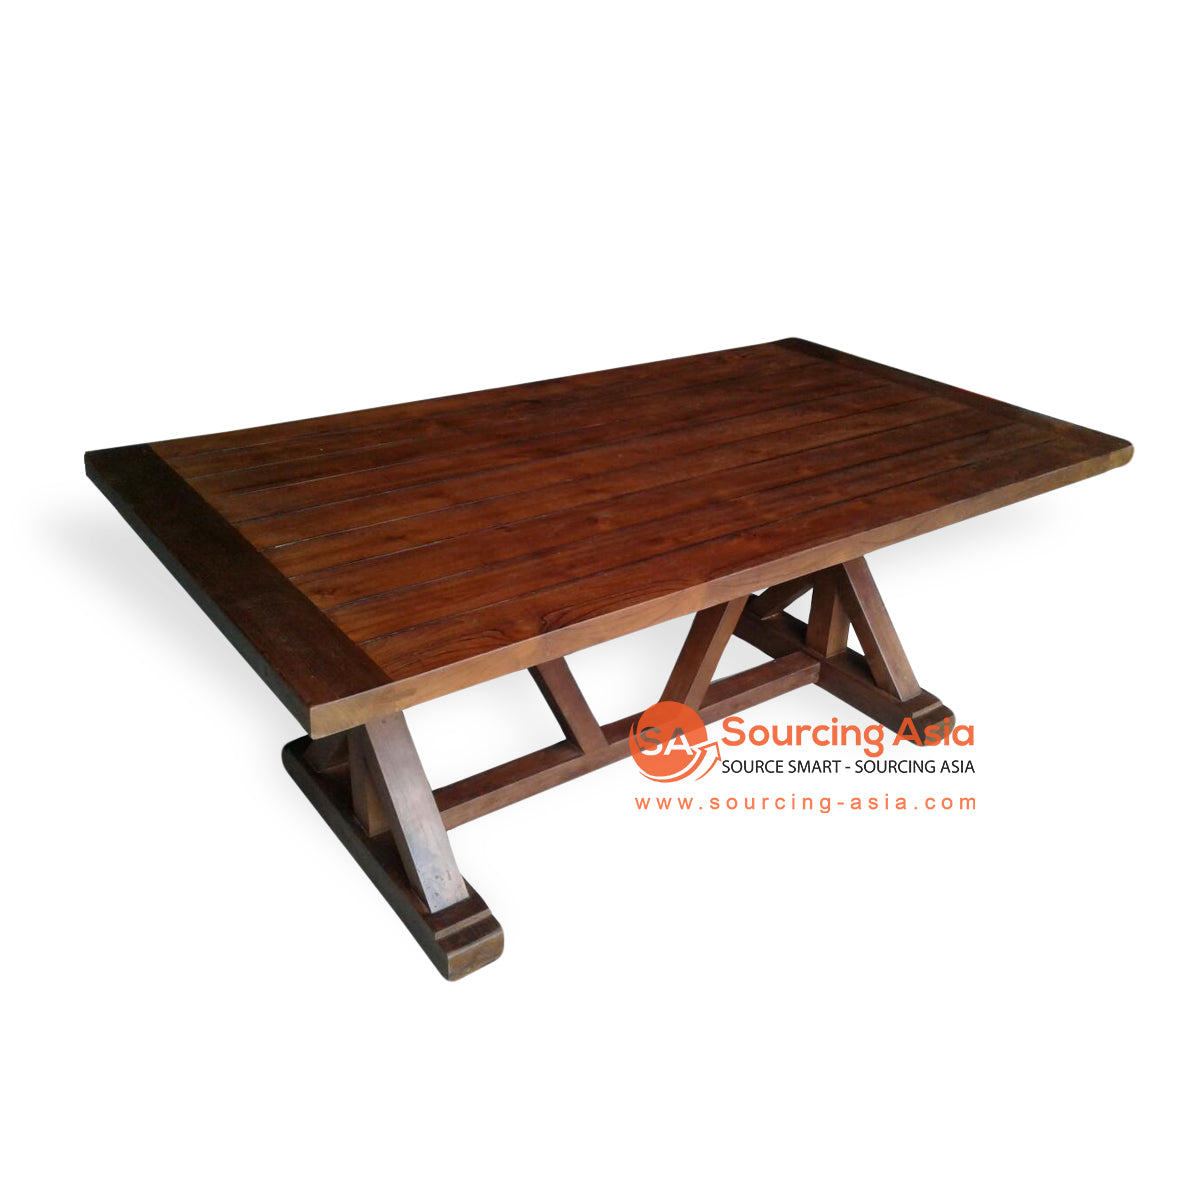 ECL080 BROWN RECYCLED TEAK COLONIAL DINING TABLE